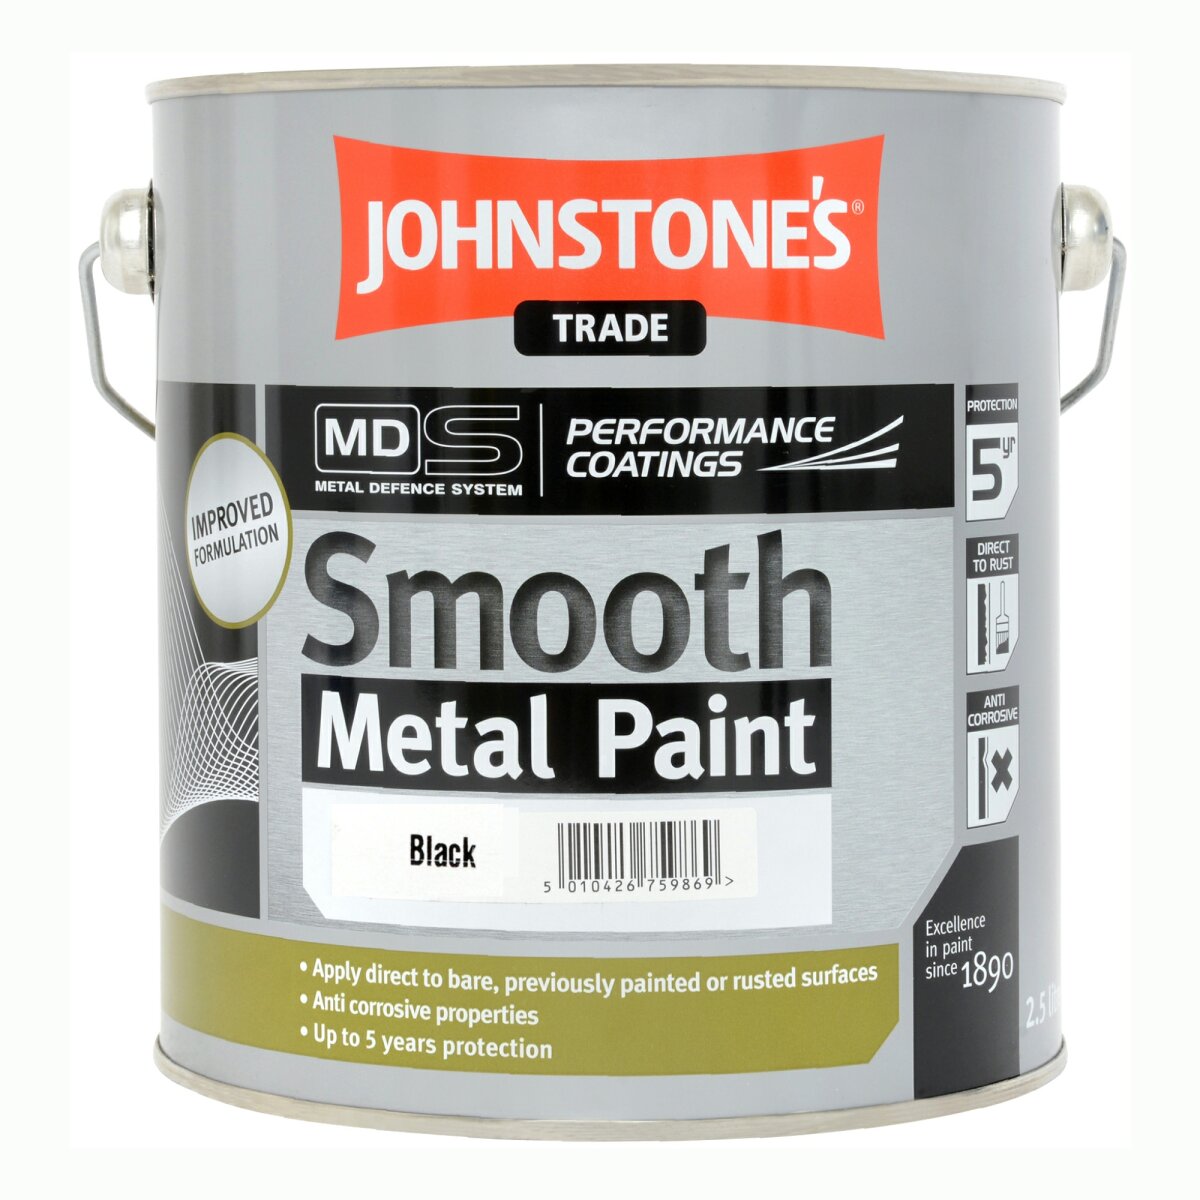 Johnstone's Anti-Corrosive Smooth Metal Paint | Primer + Top Coat in one